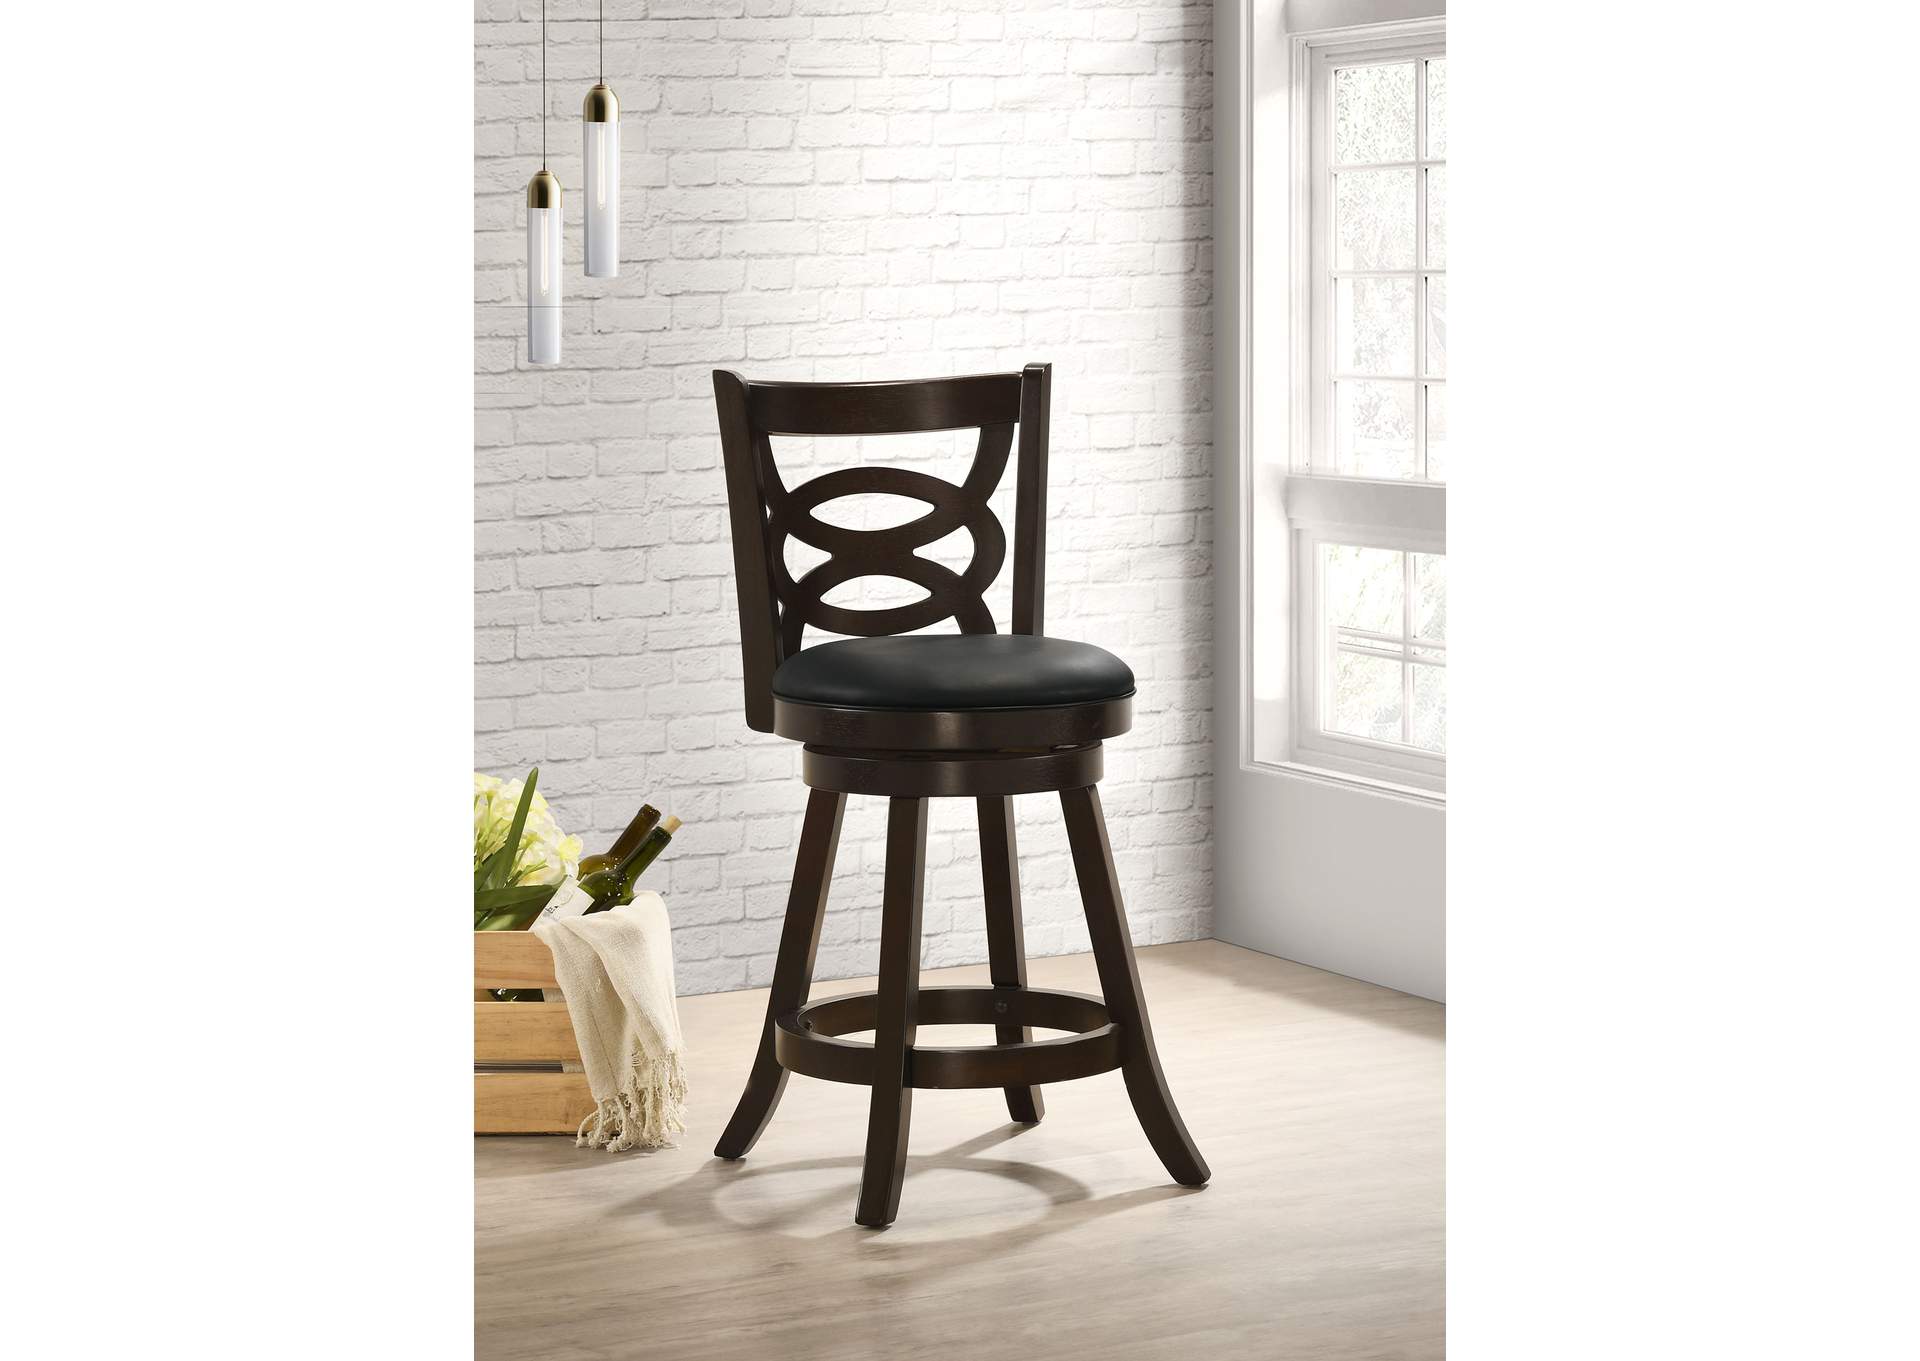 Calecita Swivel Counter Height Stools with Upholstered Seat Cappuccino (Set of 2)